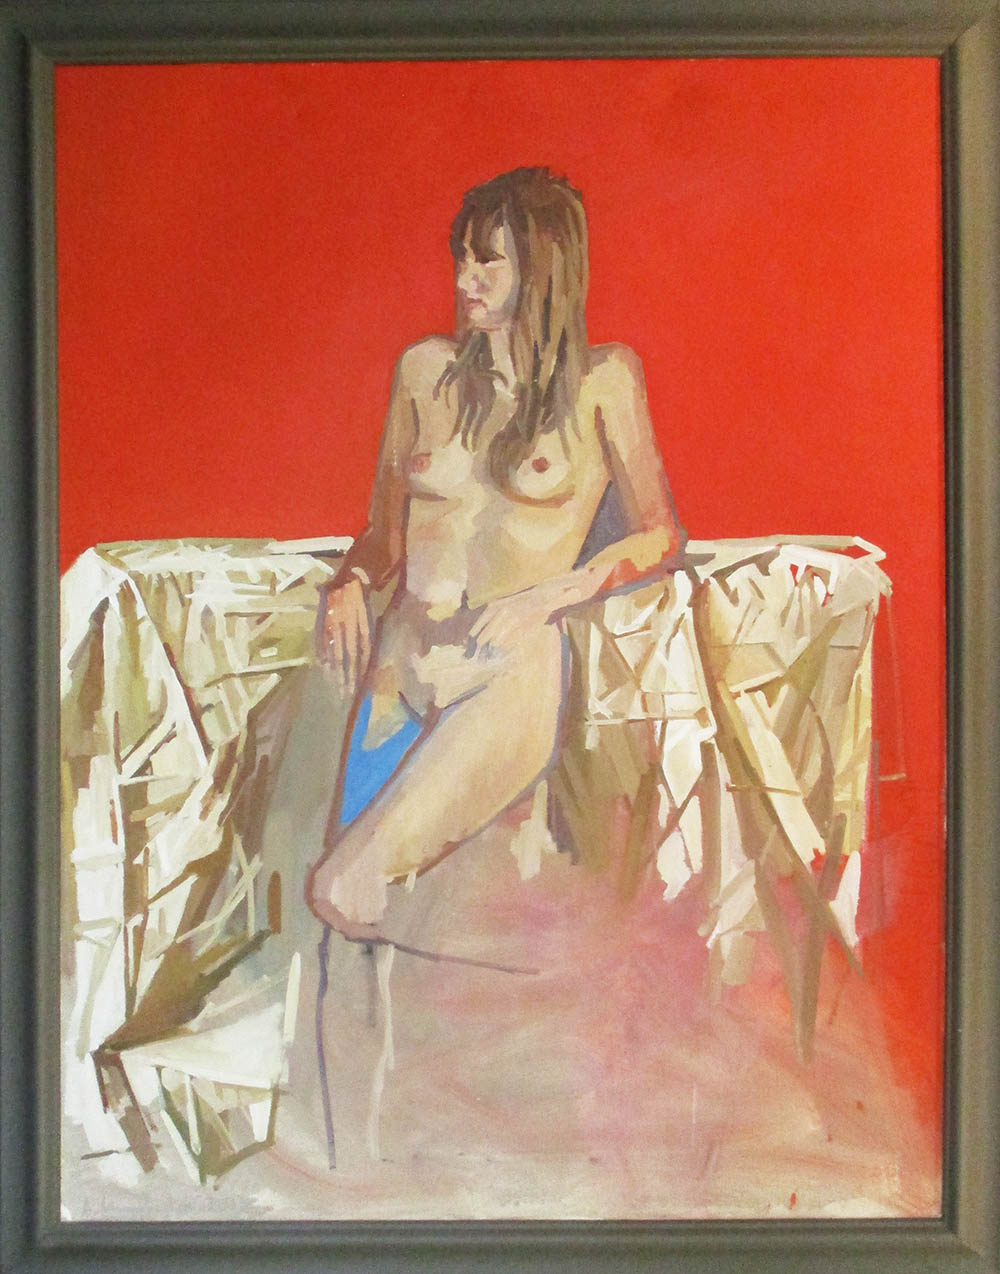 A CHAMBERLIN, 'Leaning nude', oil on canvas, signed and dated 2013 lower left, 149cm x 113cm,